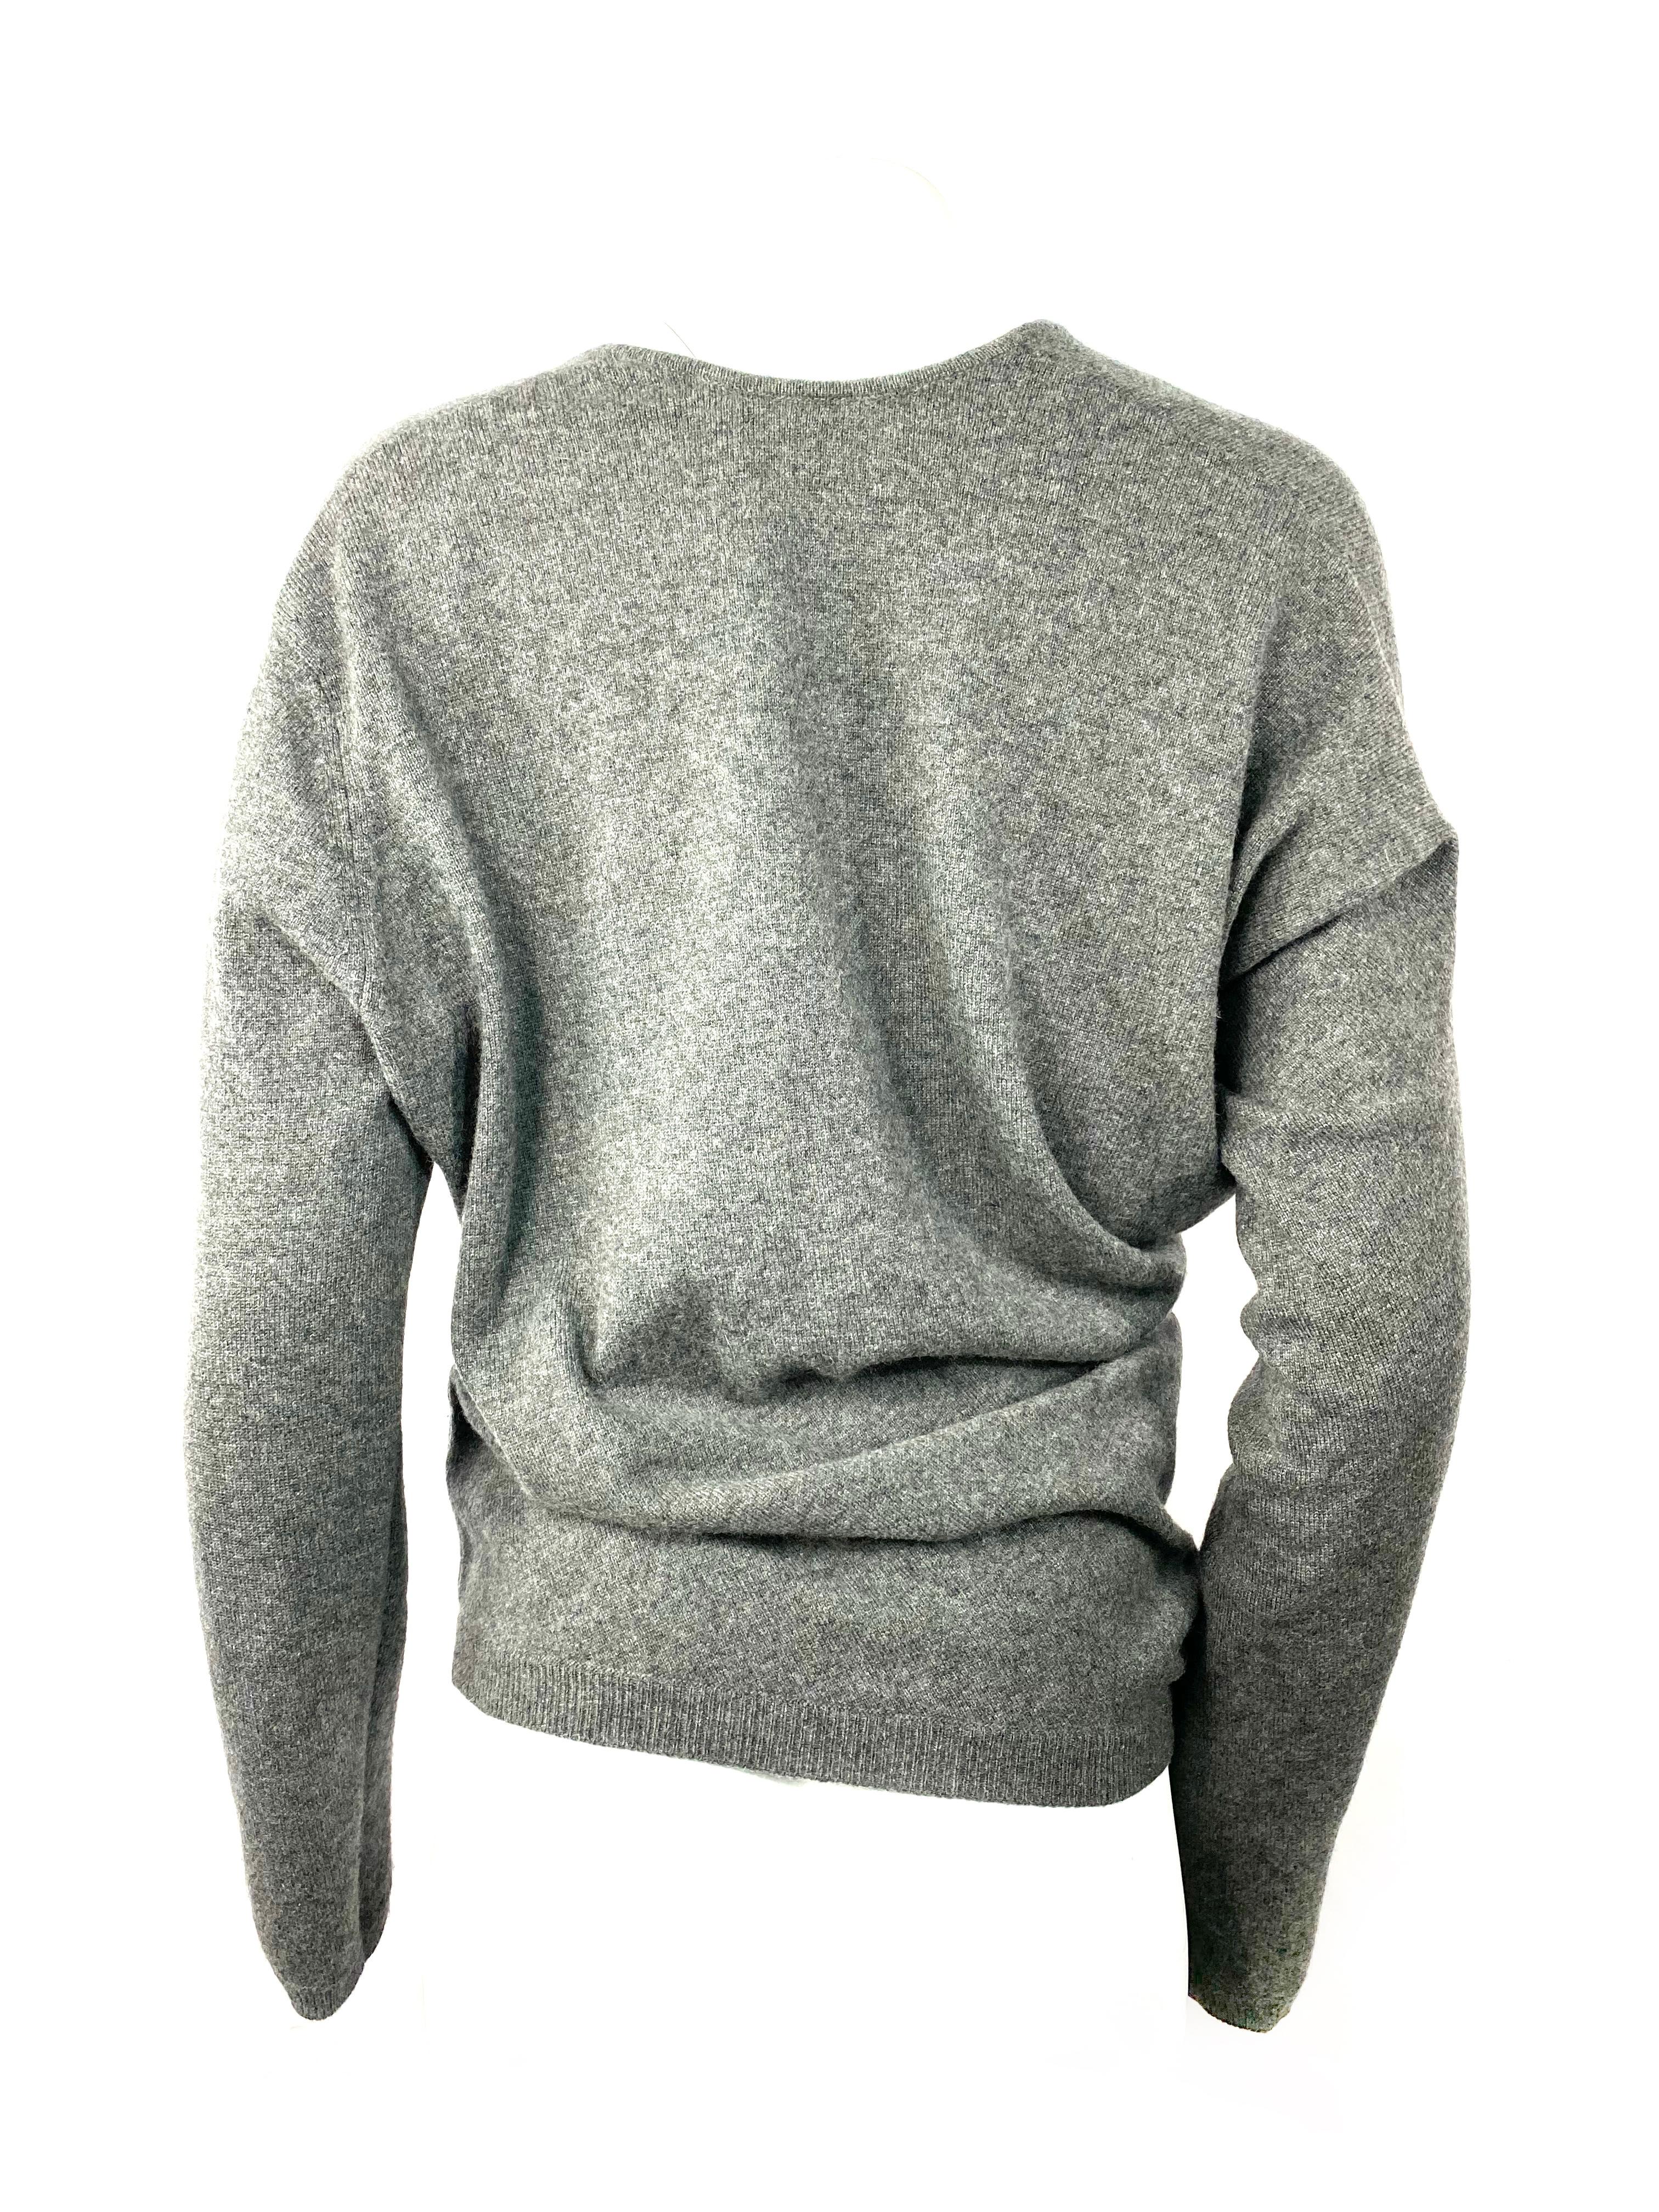 Gray Barbara Bui Grey Cashmere Long Sleeves Pullover Sweater Size S  For Sale